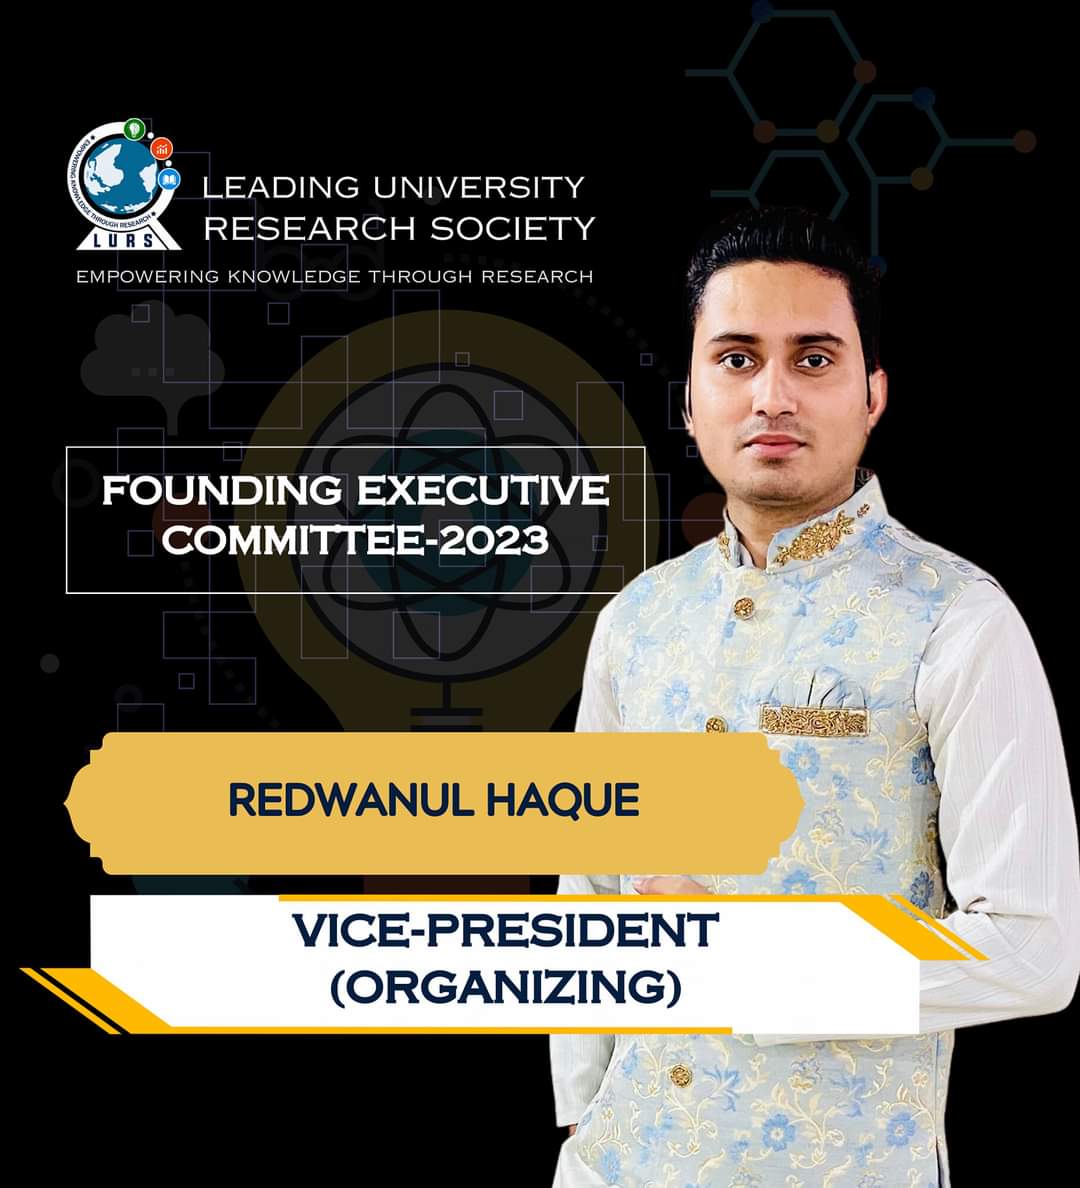 2023 (Vice-President), We are thrilled to announce the establishment of the very first Executive Committee of the LURS. 
#LURSfoundingExecutuveCommittee2023 
#LURS #BDRS #LeadingUniversityResearchSociety
#LeadingUniversity
#BangladeshResearchSociety